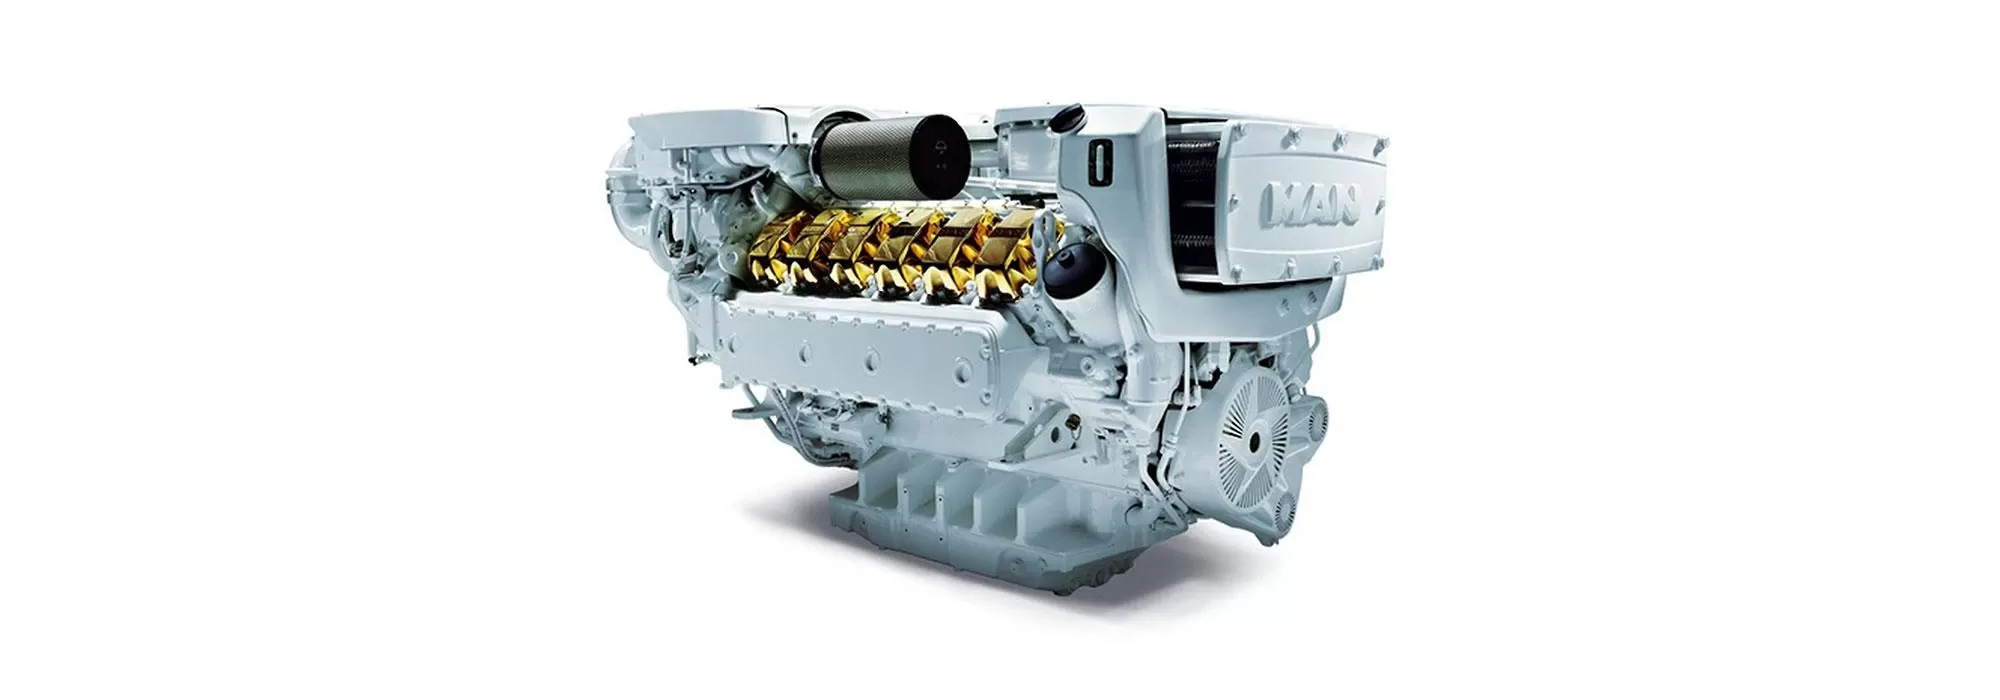 Yacht MAN Engines manufactured by Man Engines are suitable for application to expensive yachts and sport fishing boats